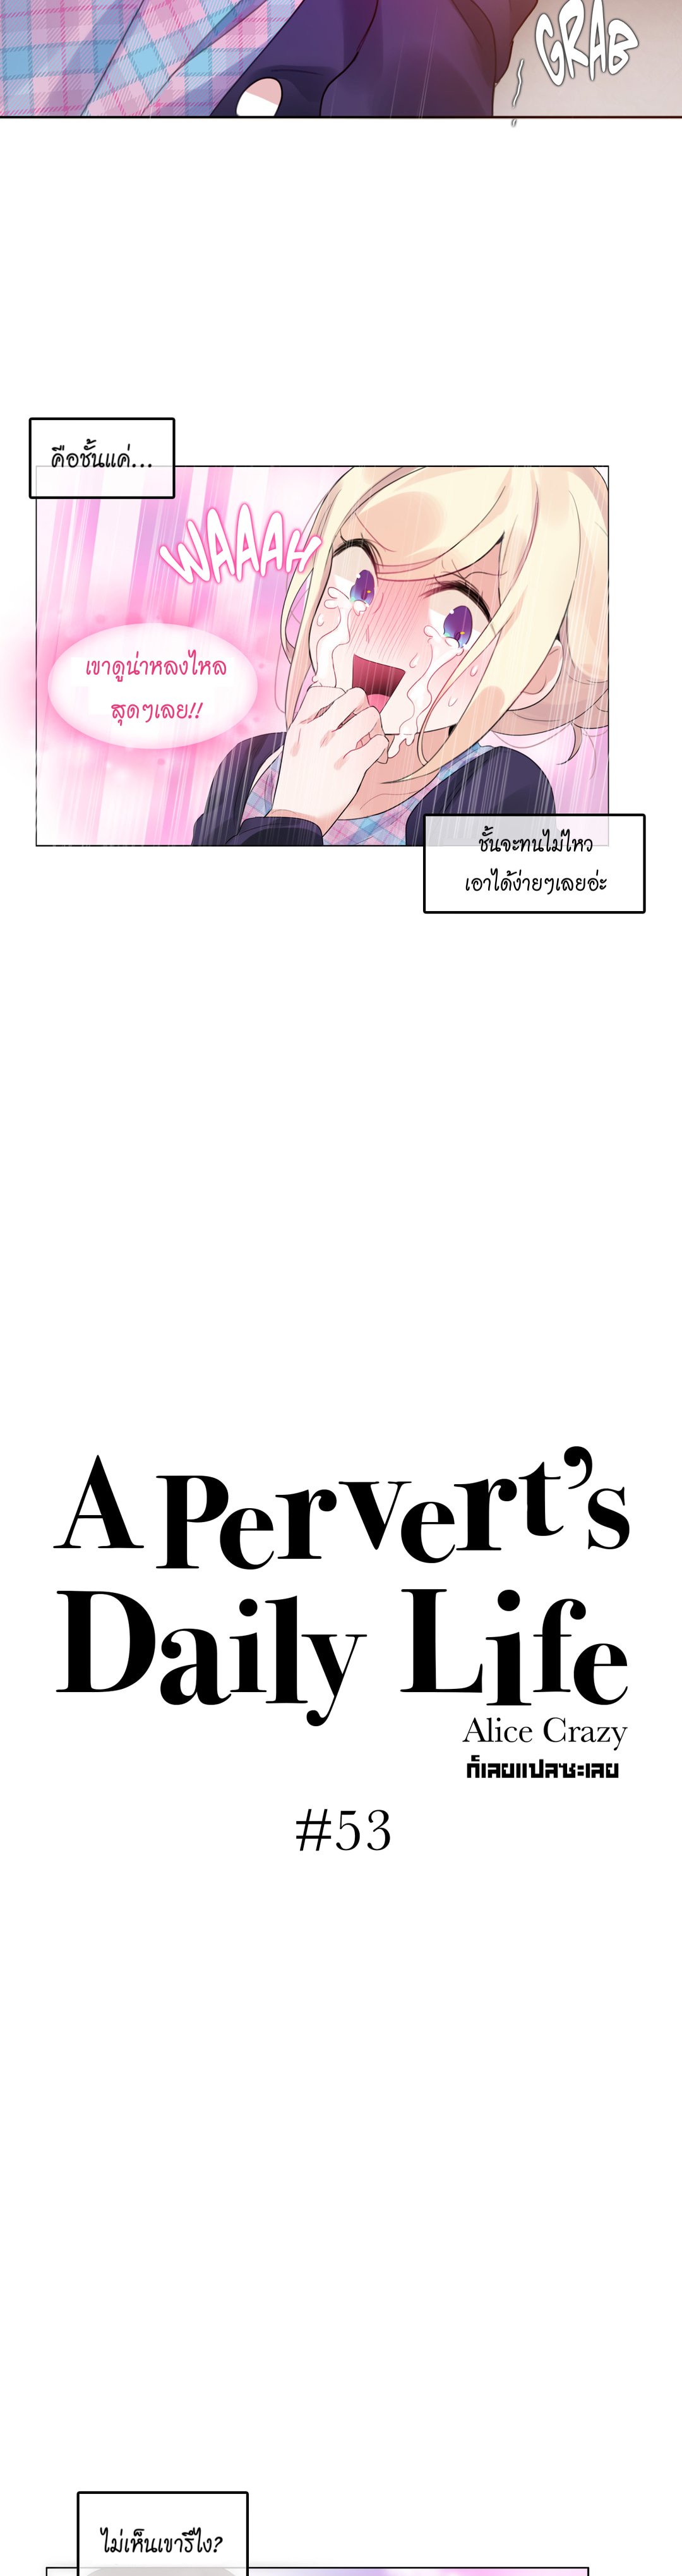 A Pervert’s Daily Life 53 05